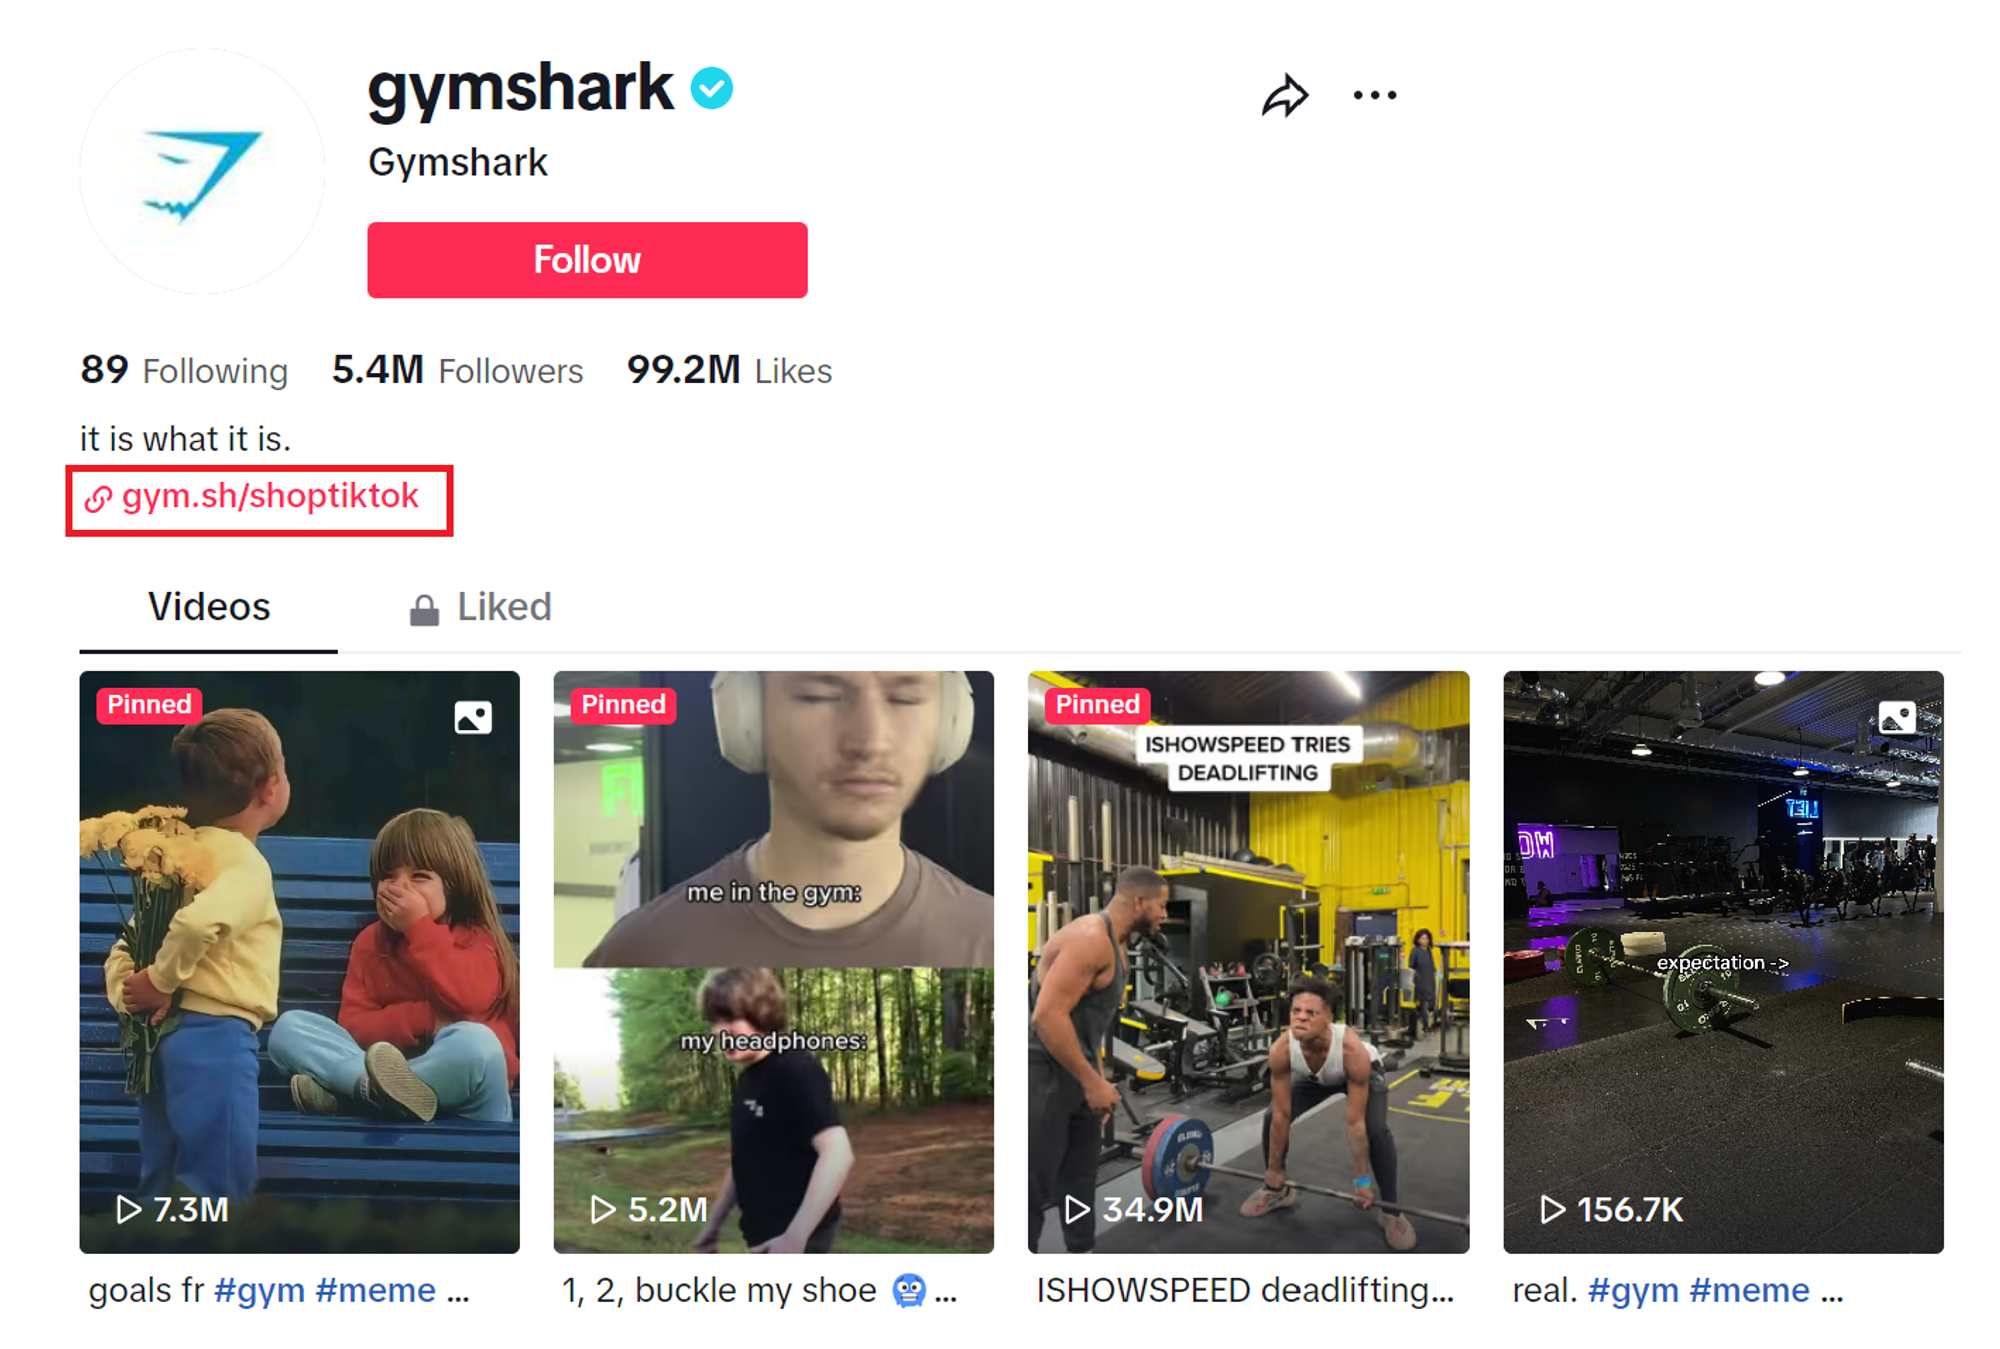 Gymshark’s official TikTok page